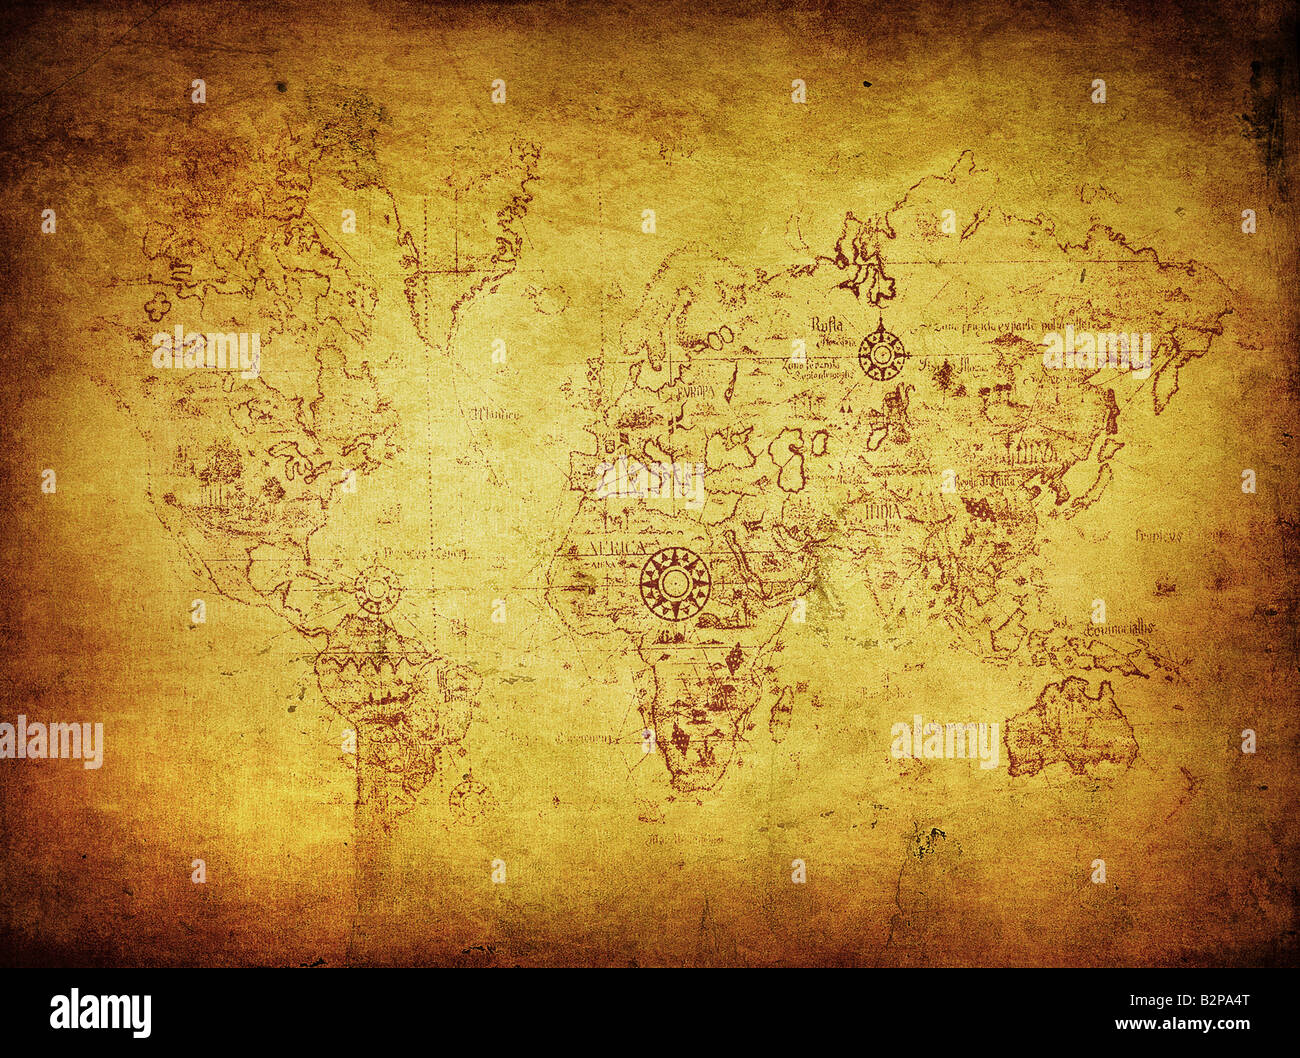 Ancient Map Of The World B2PA4T 